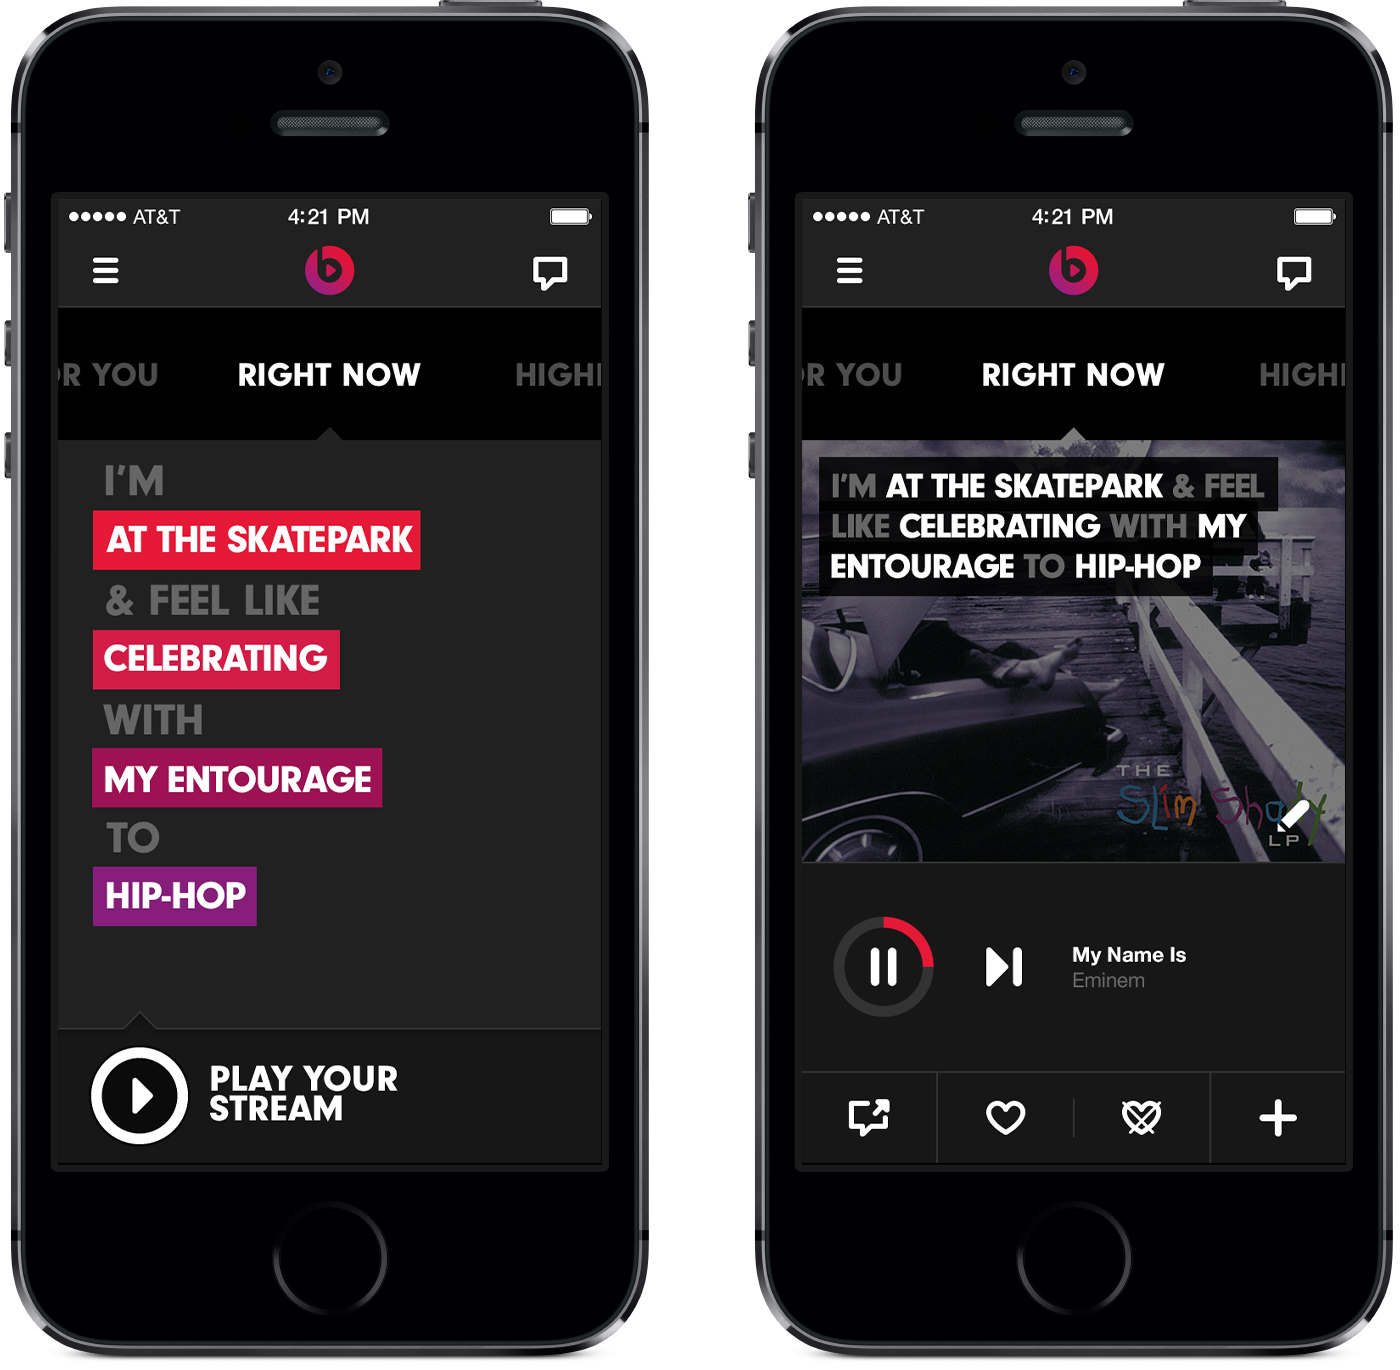 Beats Music (iPhone 5s, right Now)